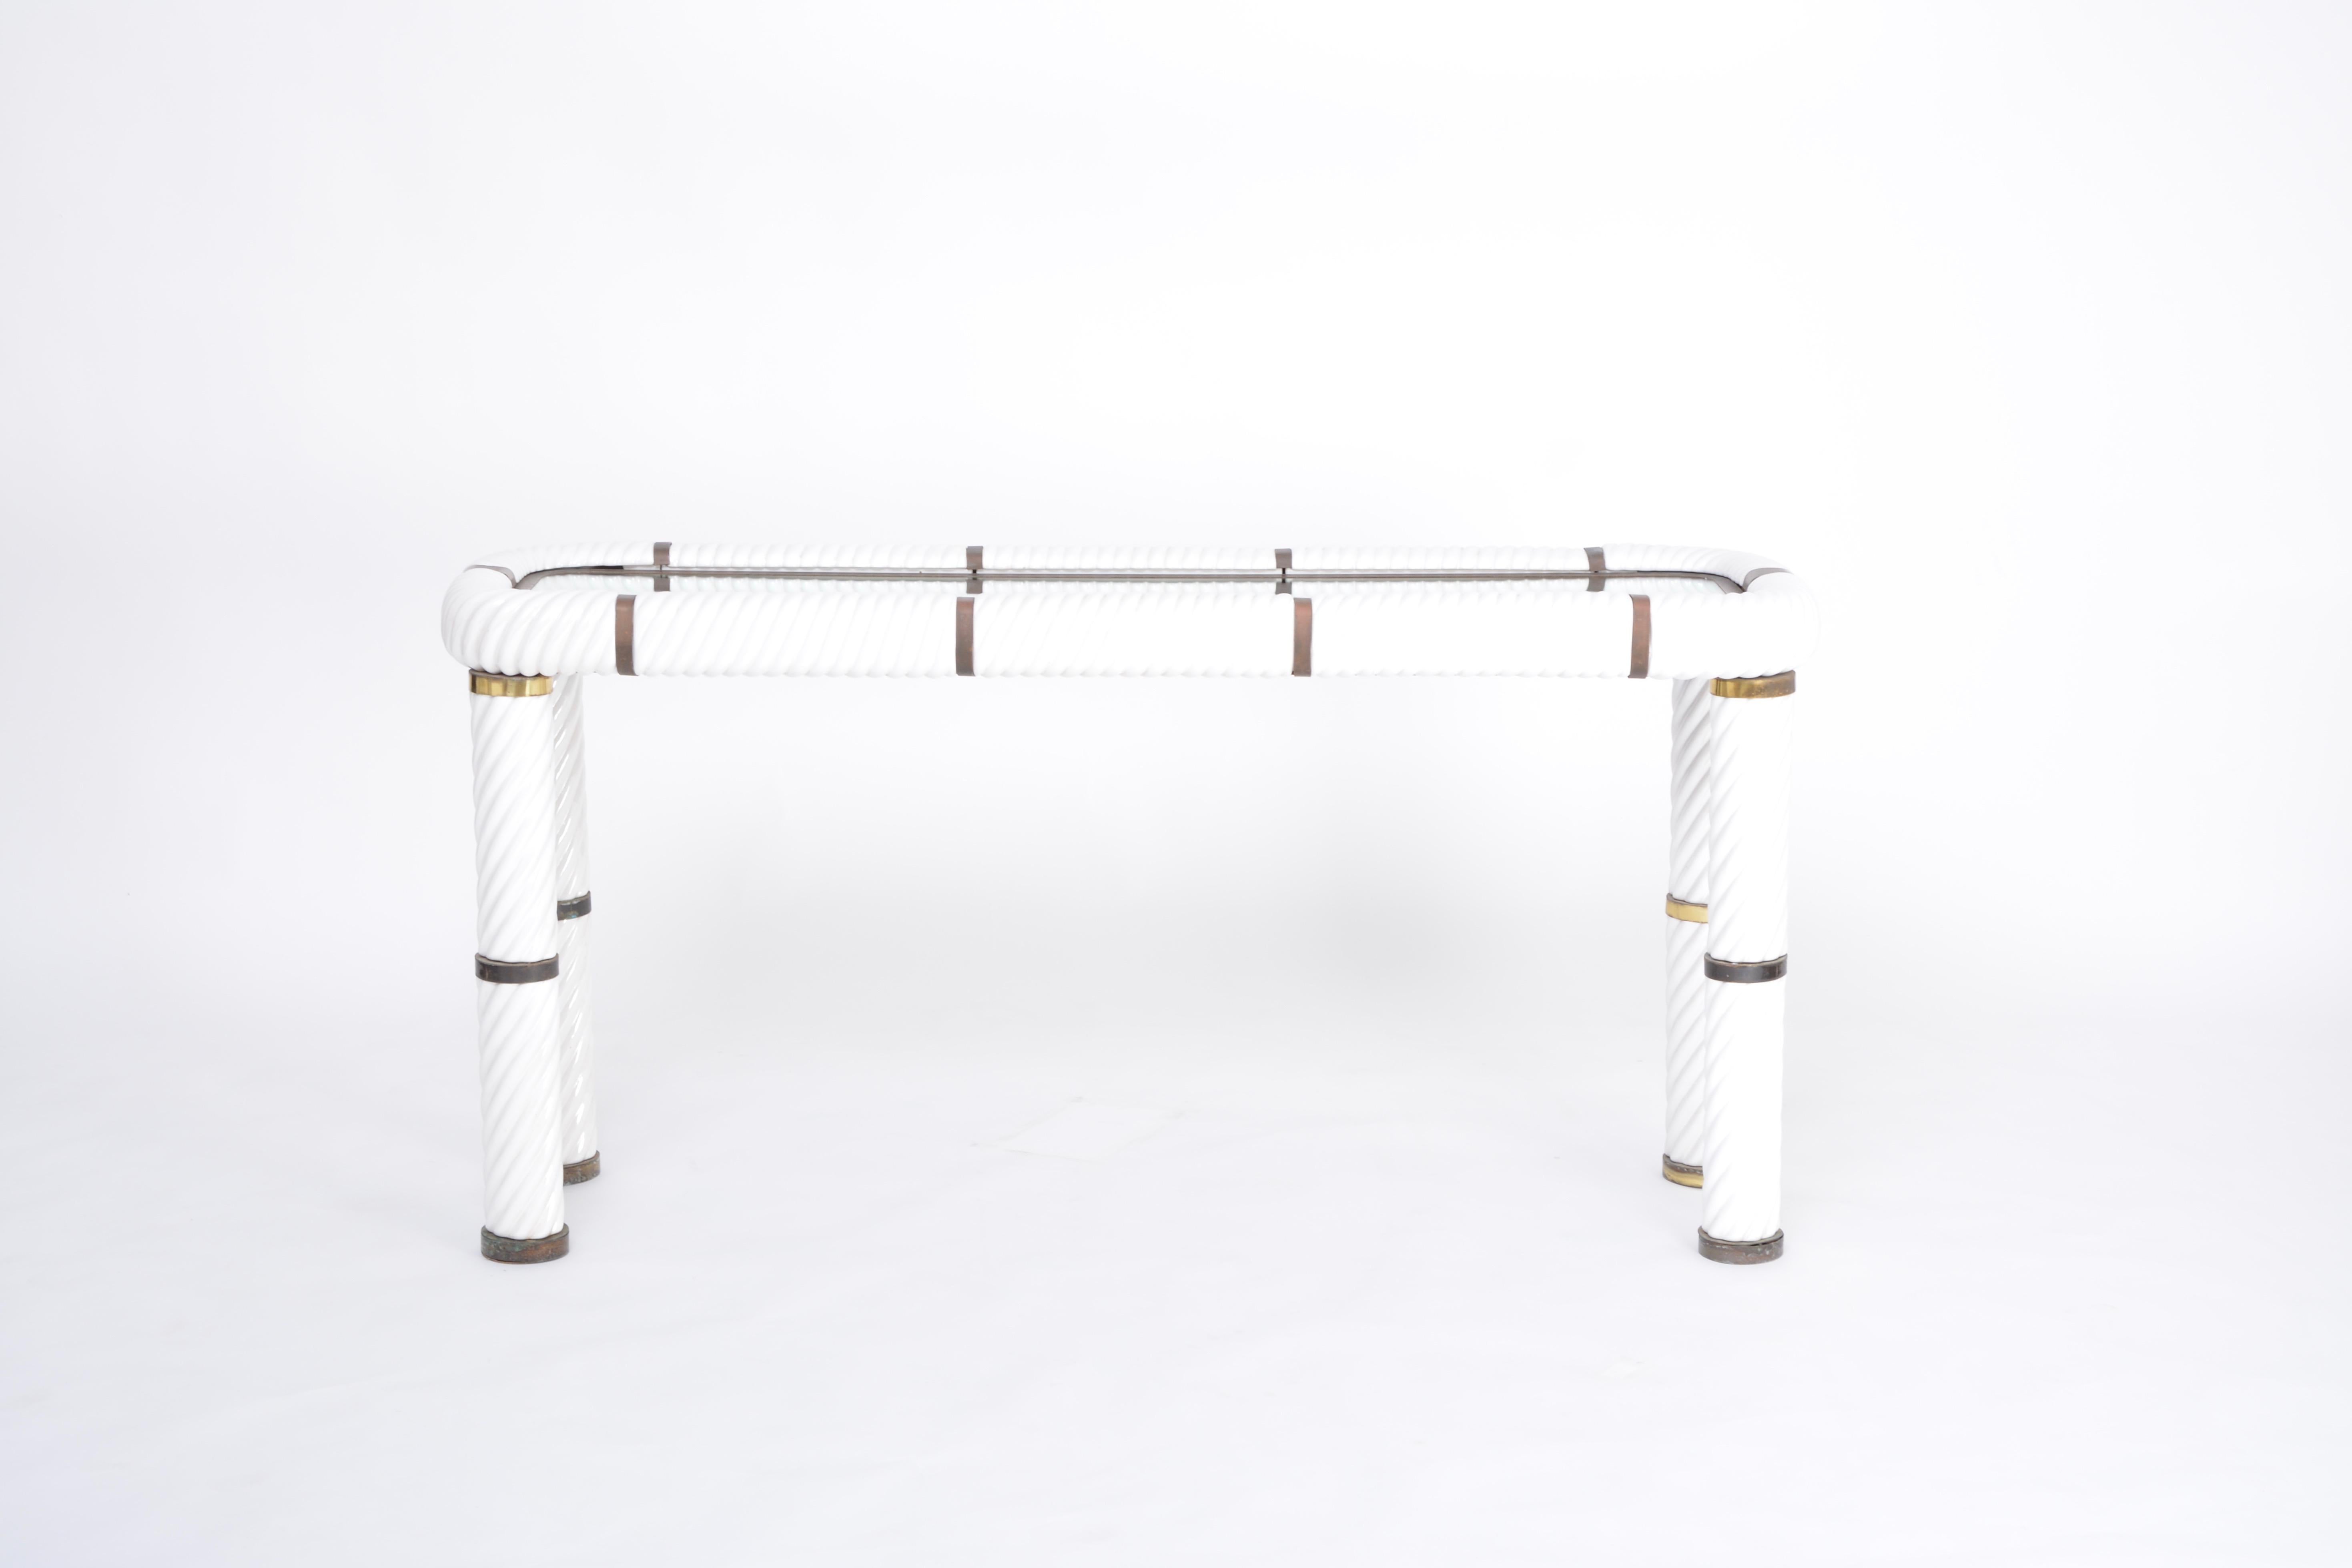 Rare 1970s Tommaso barbi white ceramic and brass console table 
Stunning console table designed by Tommaso Barby. This table features one of Barbi's signature techniques, which is porcelain in a spiral form to give this table it's absolute stunning